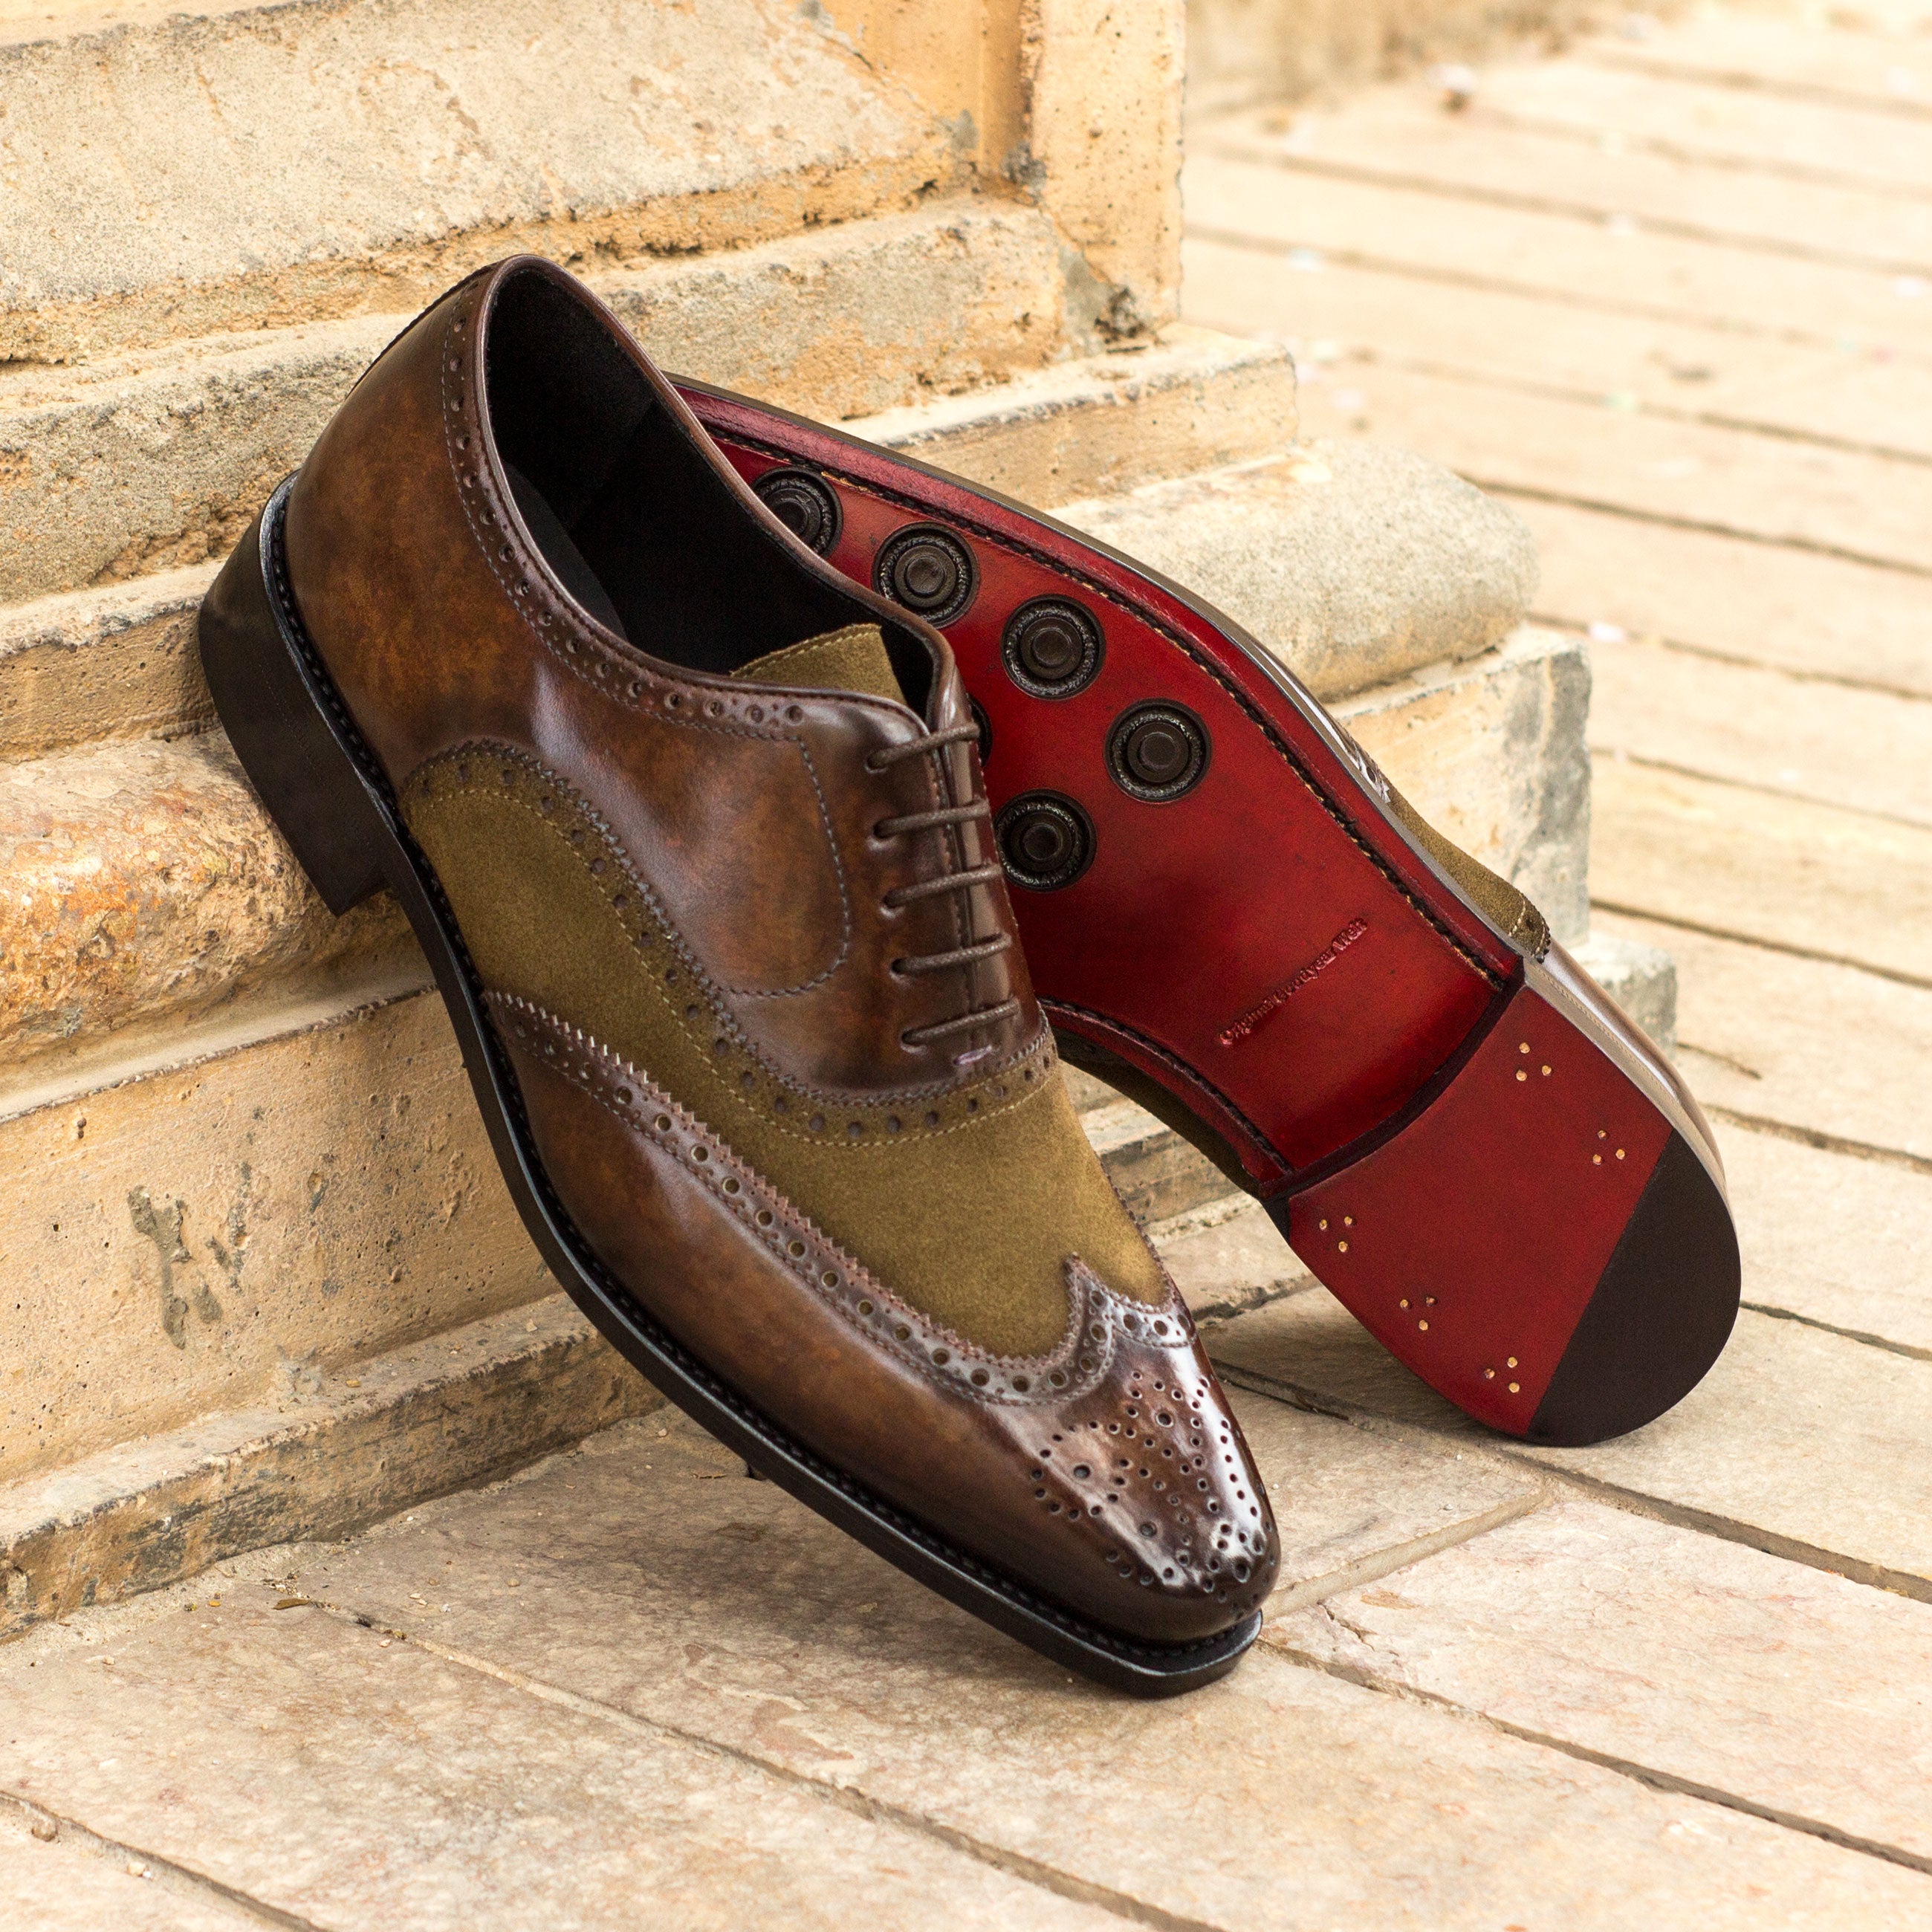 SUITCAFE Full Brogue Cognac and Green Leather Patina Red Sole Men's Shoe 6